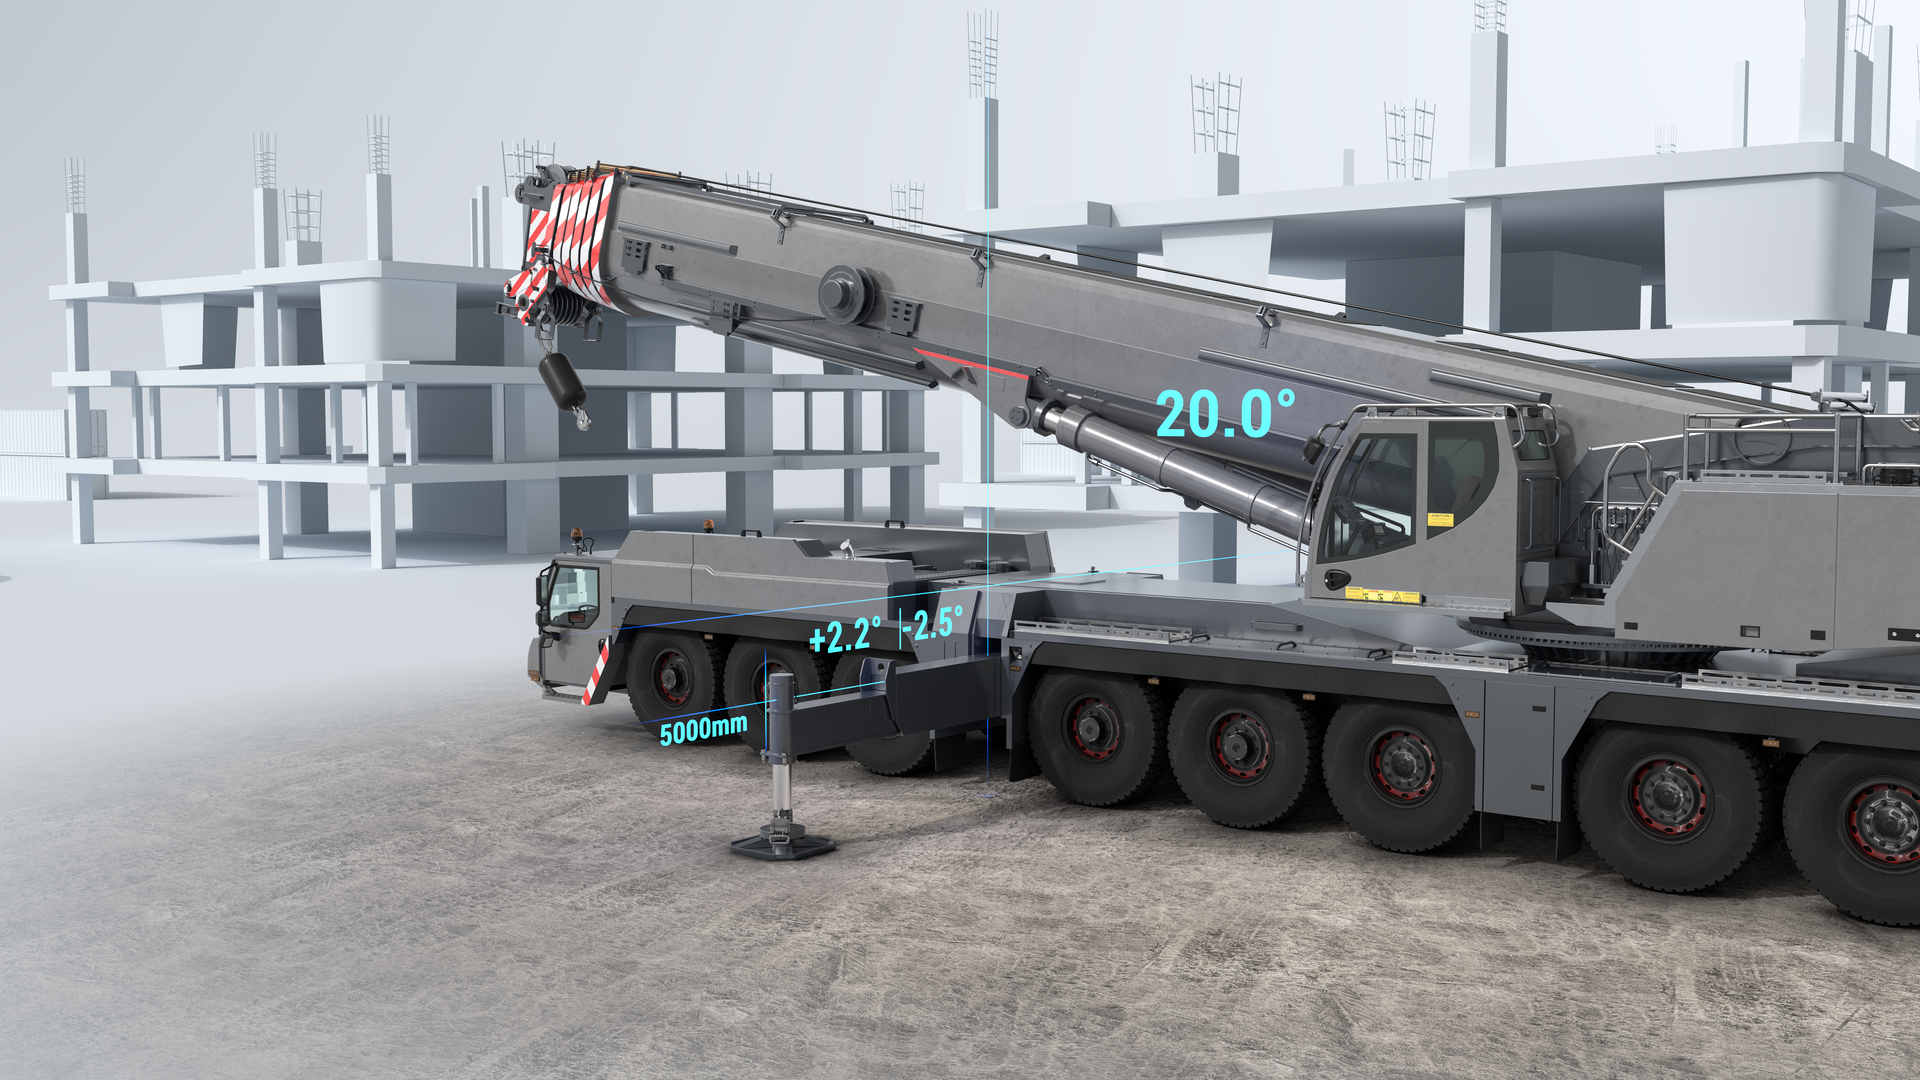 Mobile crane with sensor data from encoders and inclination sensors